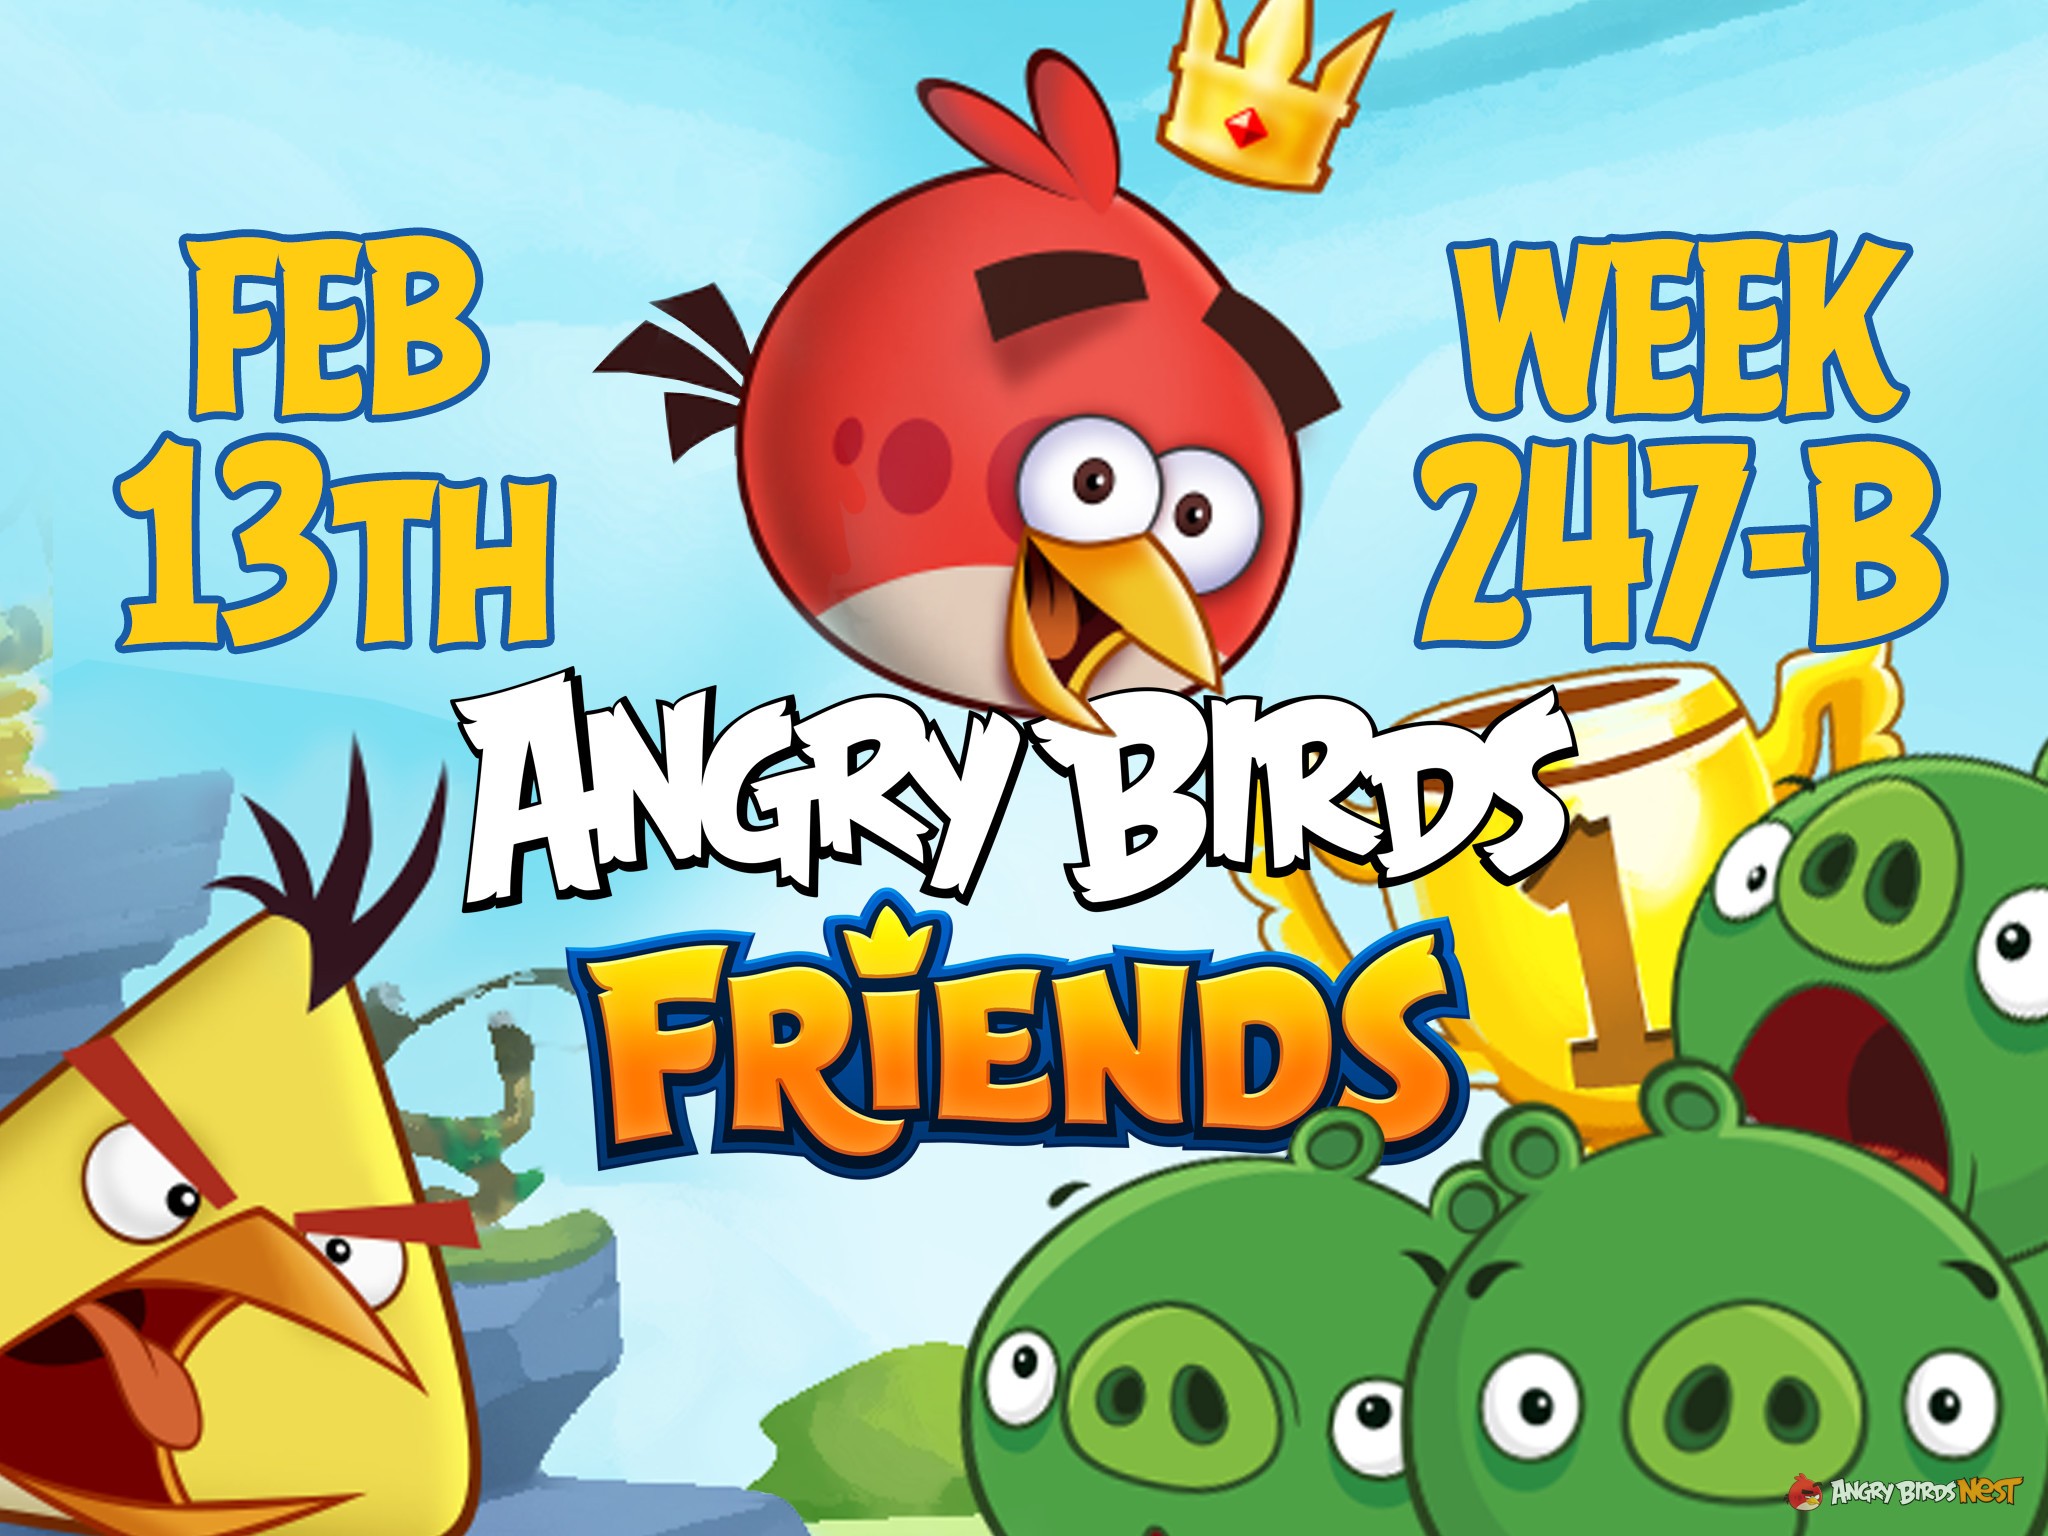 Angry Birds Friends Tournament Week 247-B Feature Image